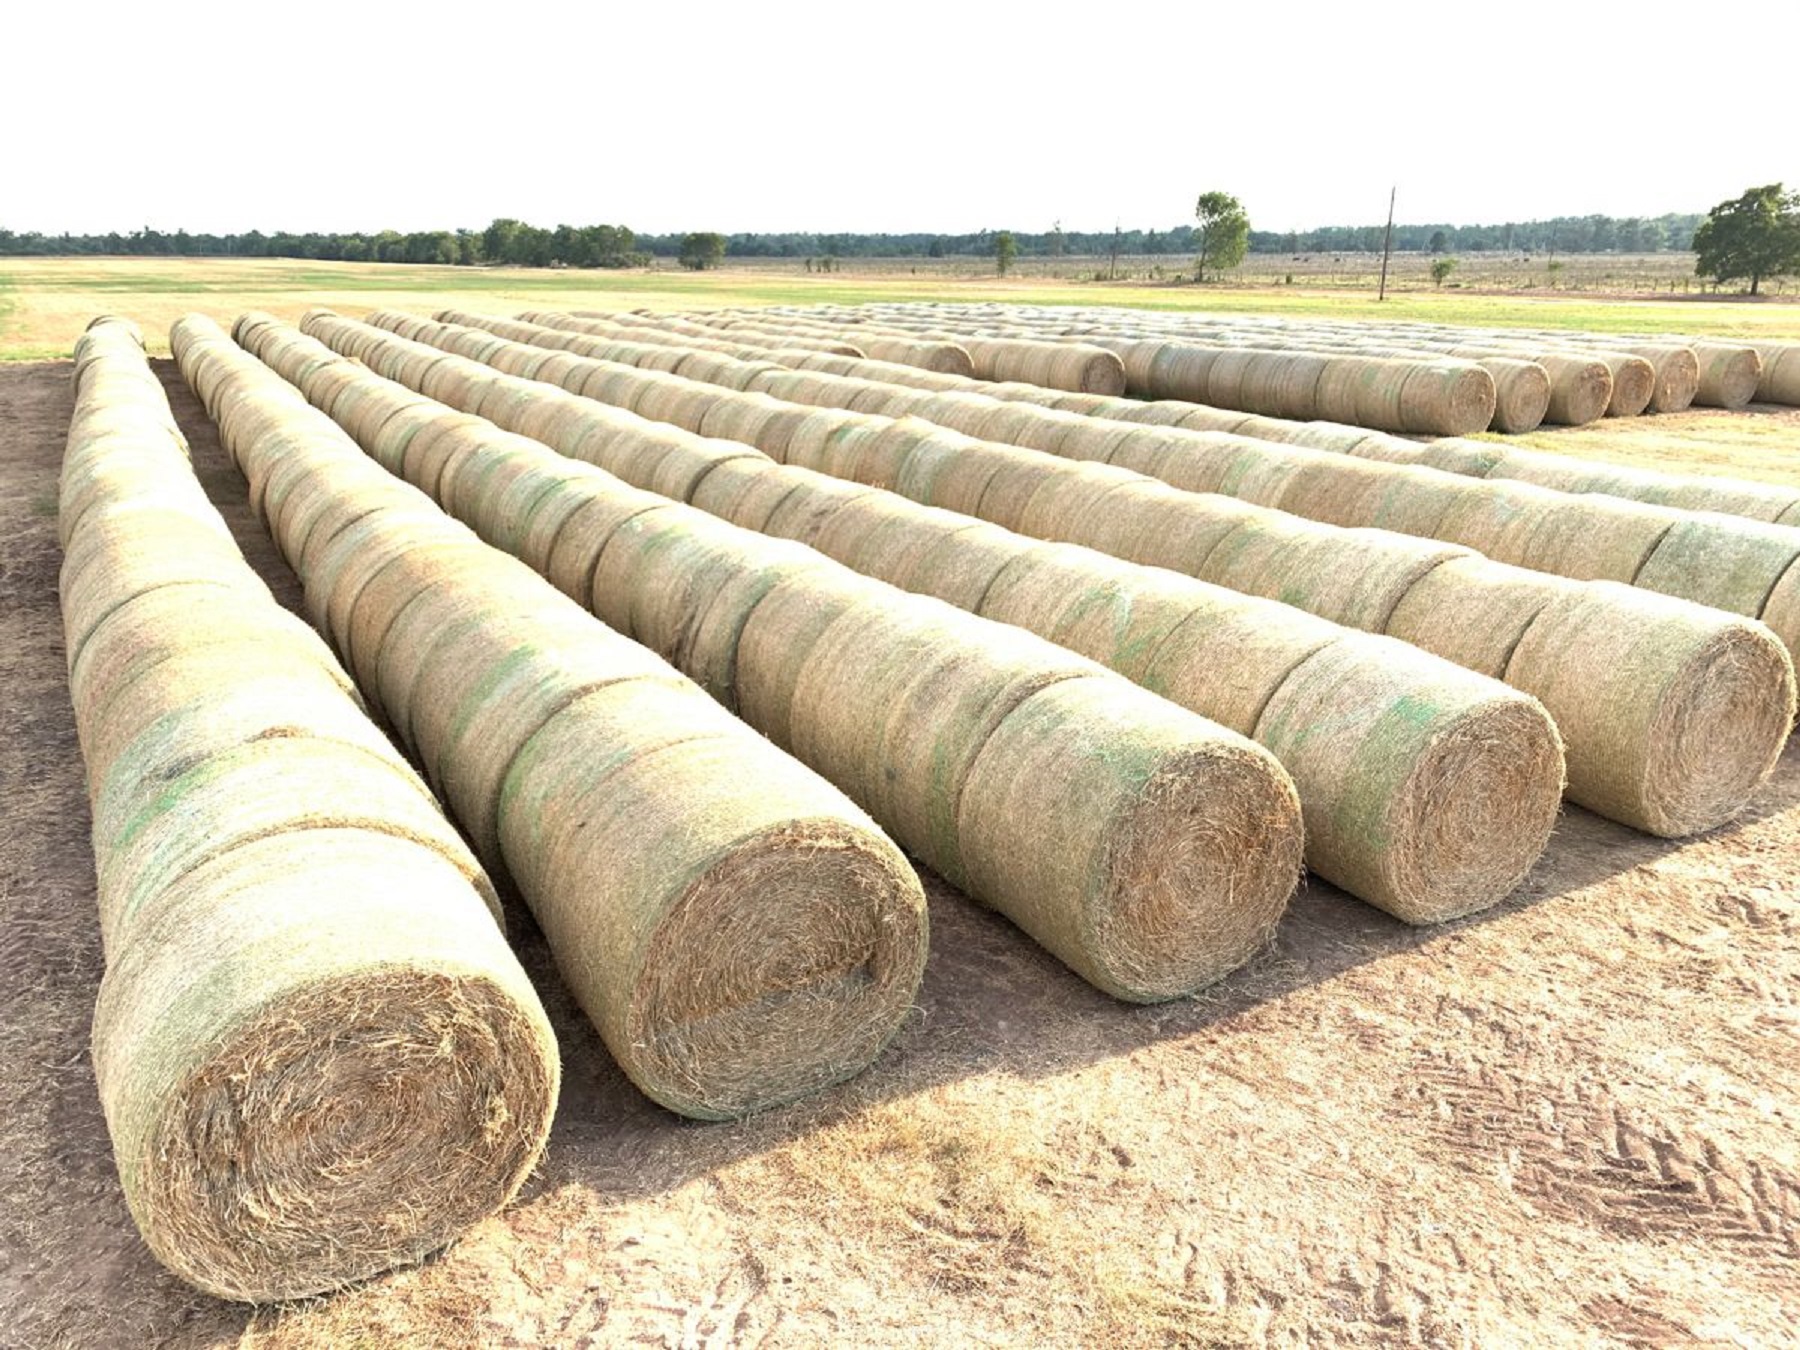 Alfalfa/Timothy/Brome mix hay bales for sale